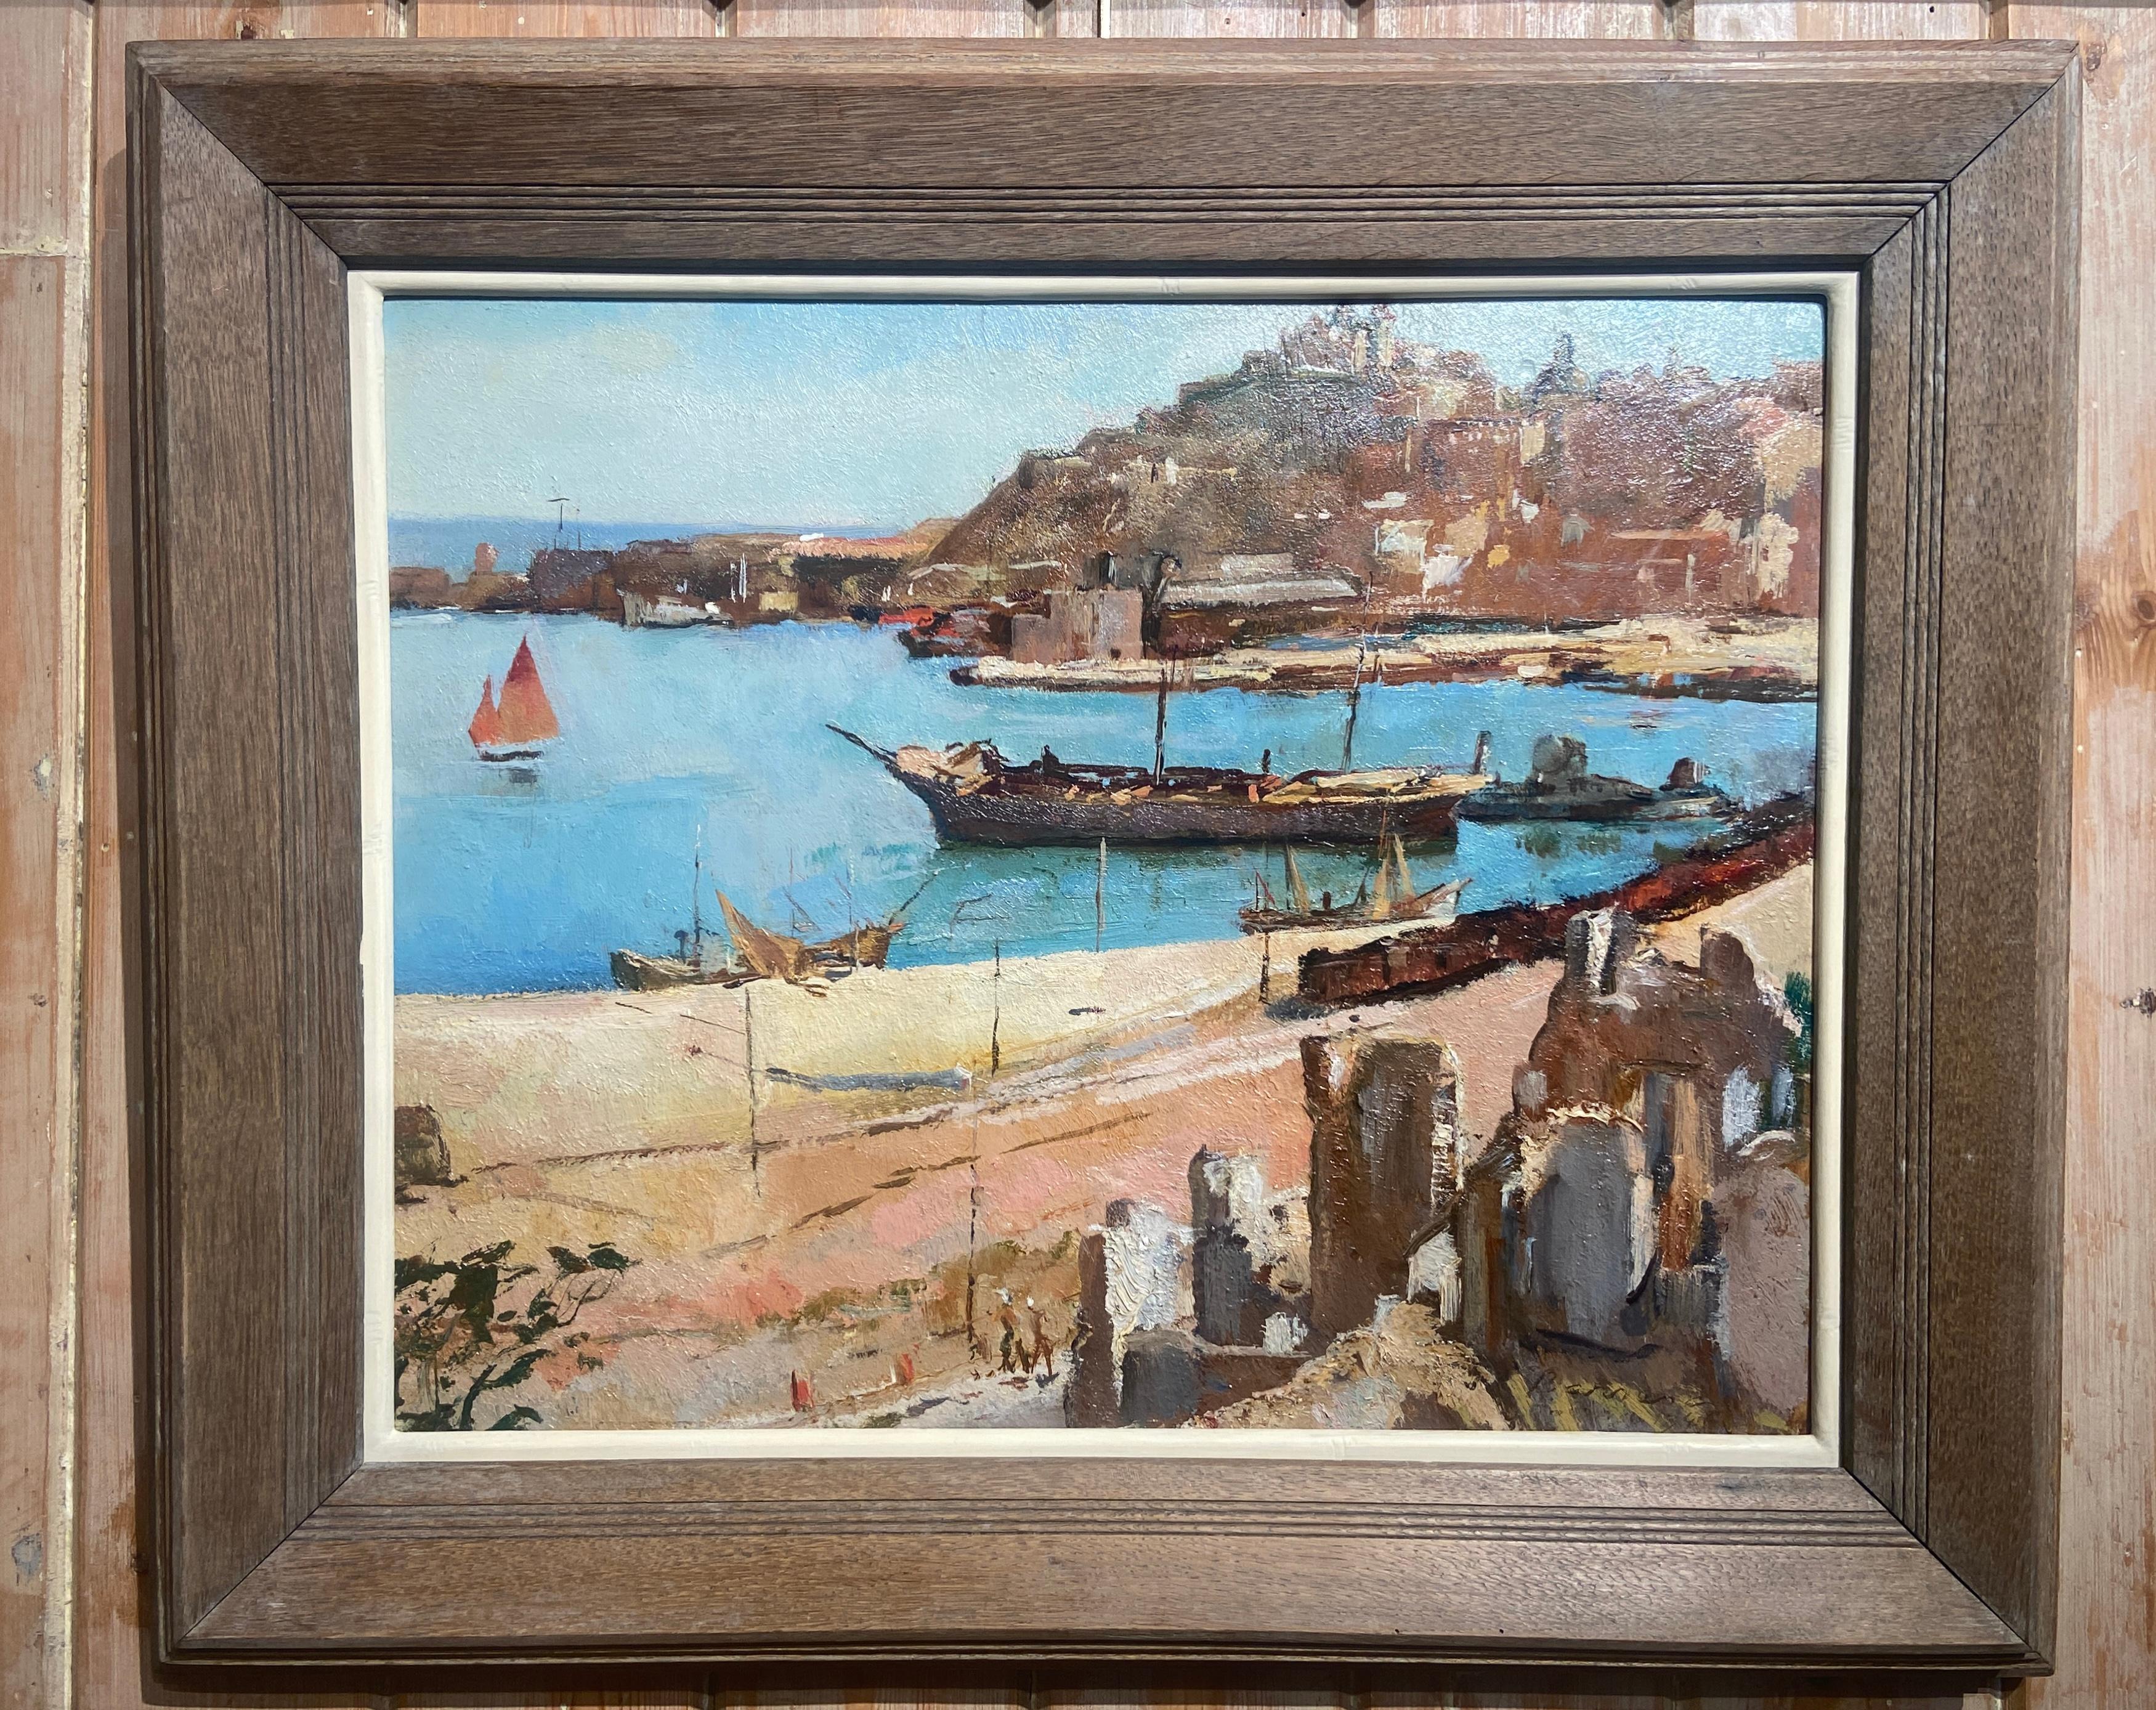 Harbour Scene - Painting by Ezelino Briante